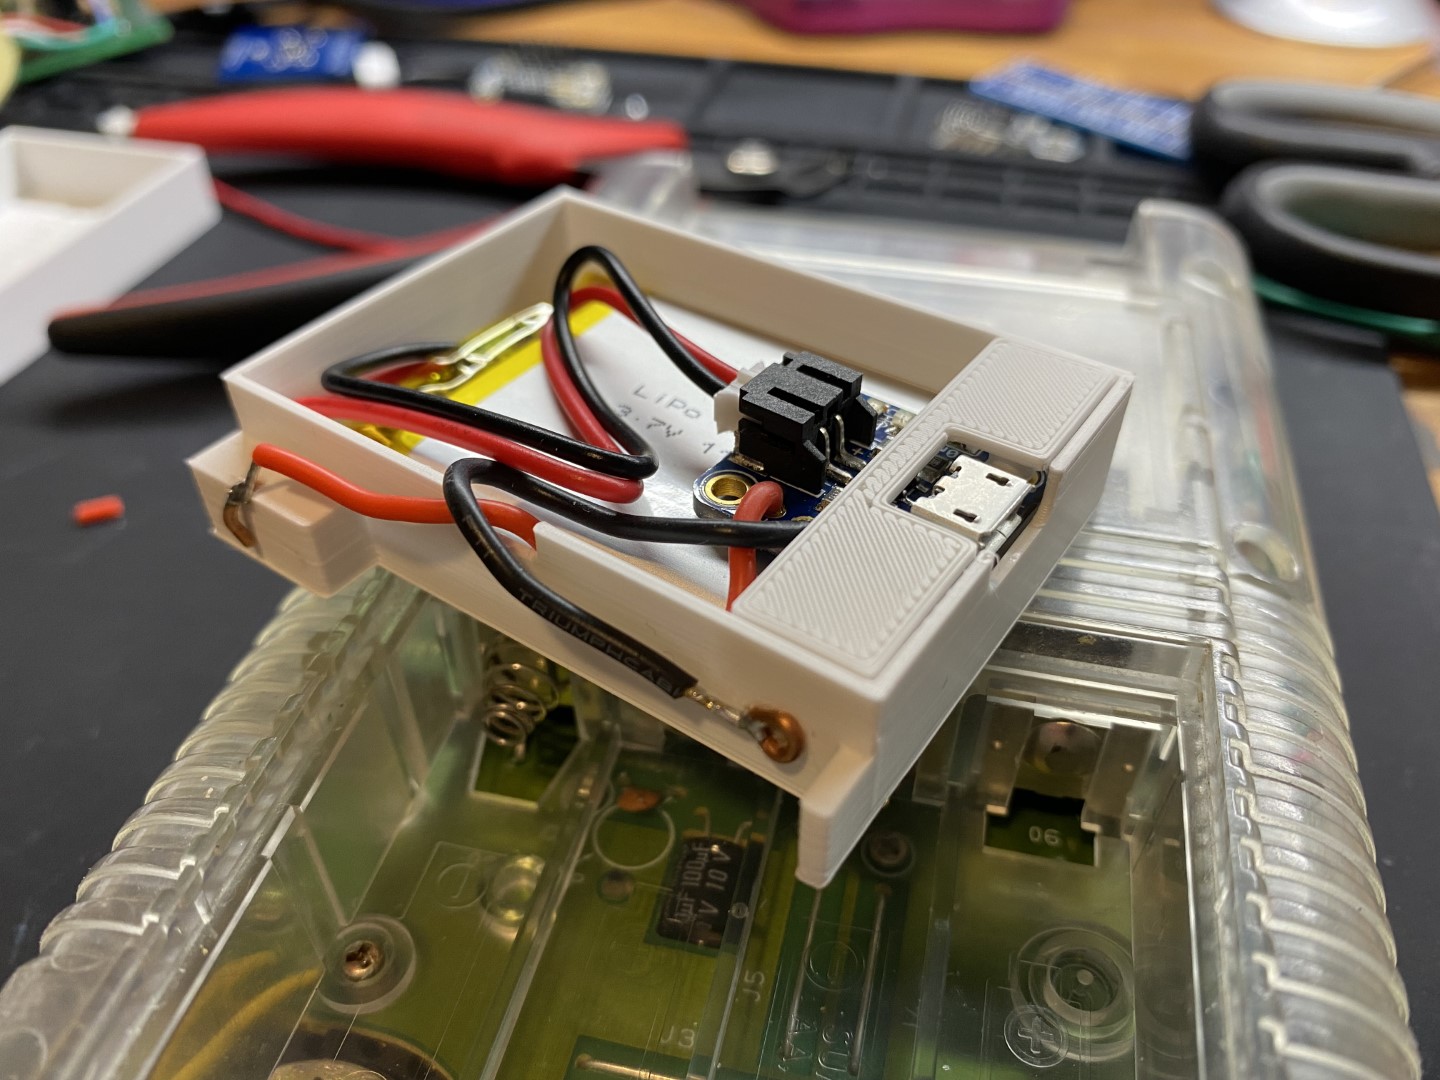 Wiring for the Gameboy LiPo Battery